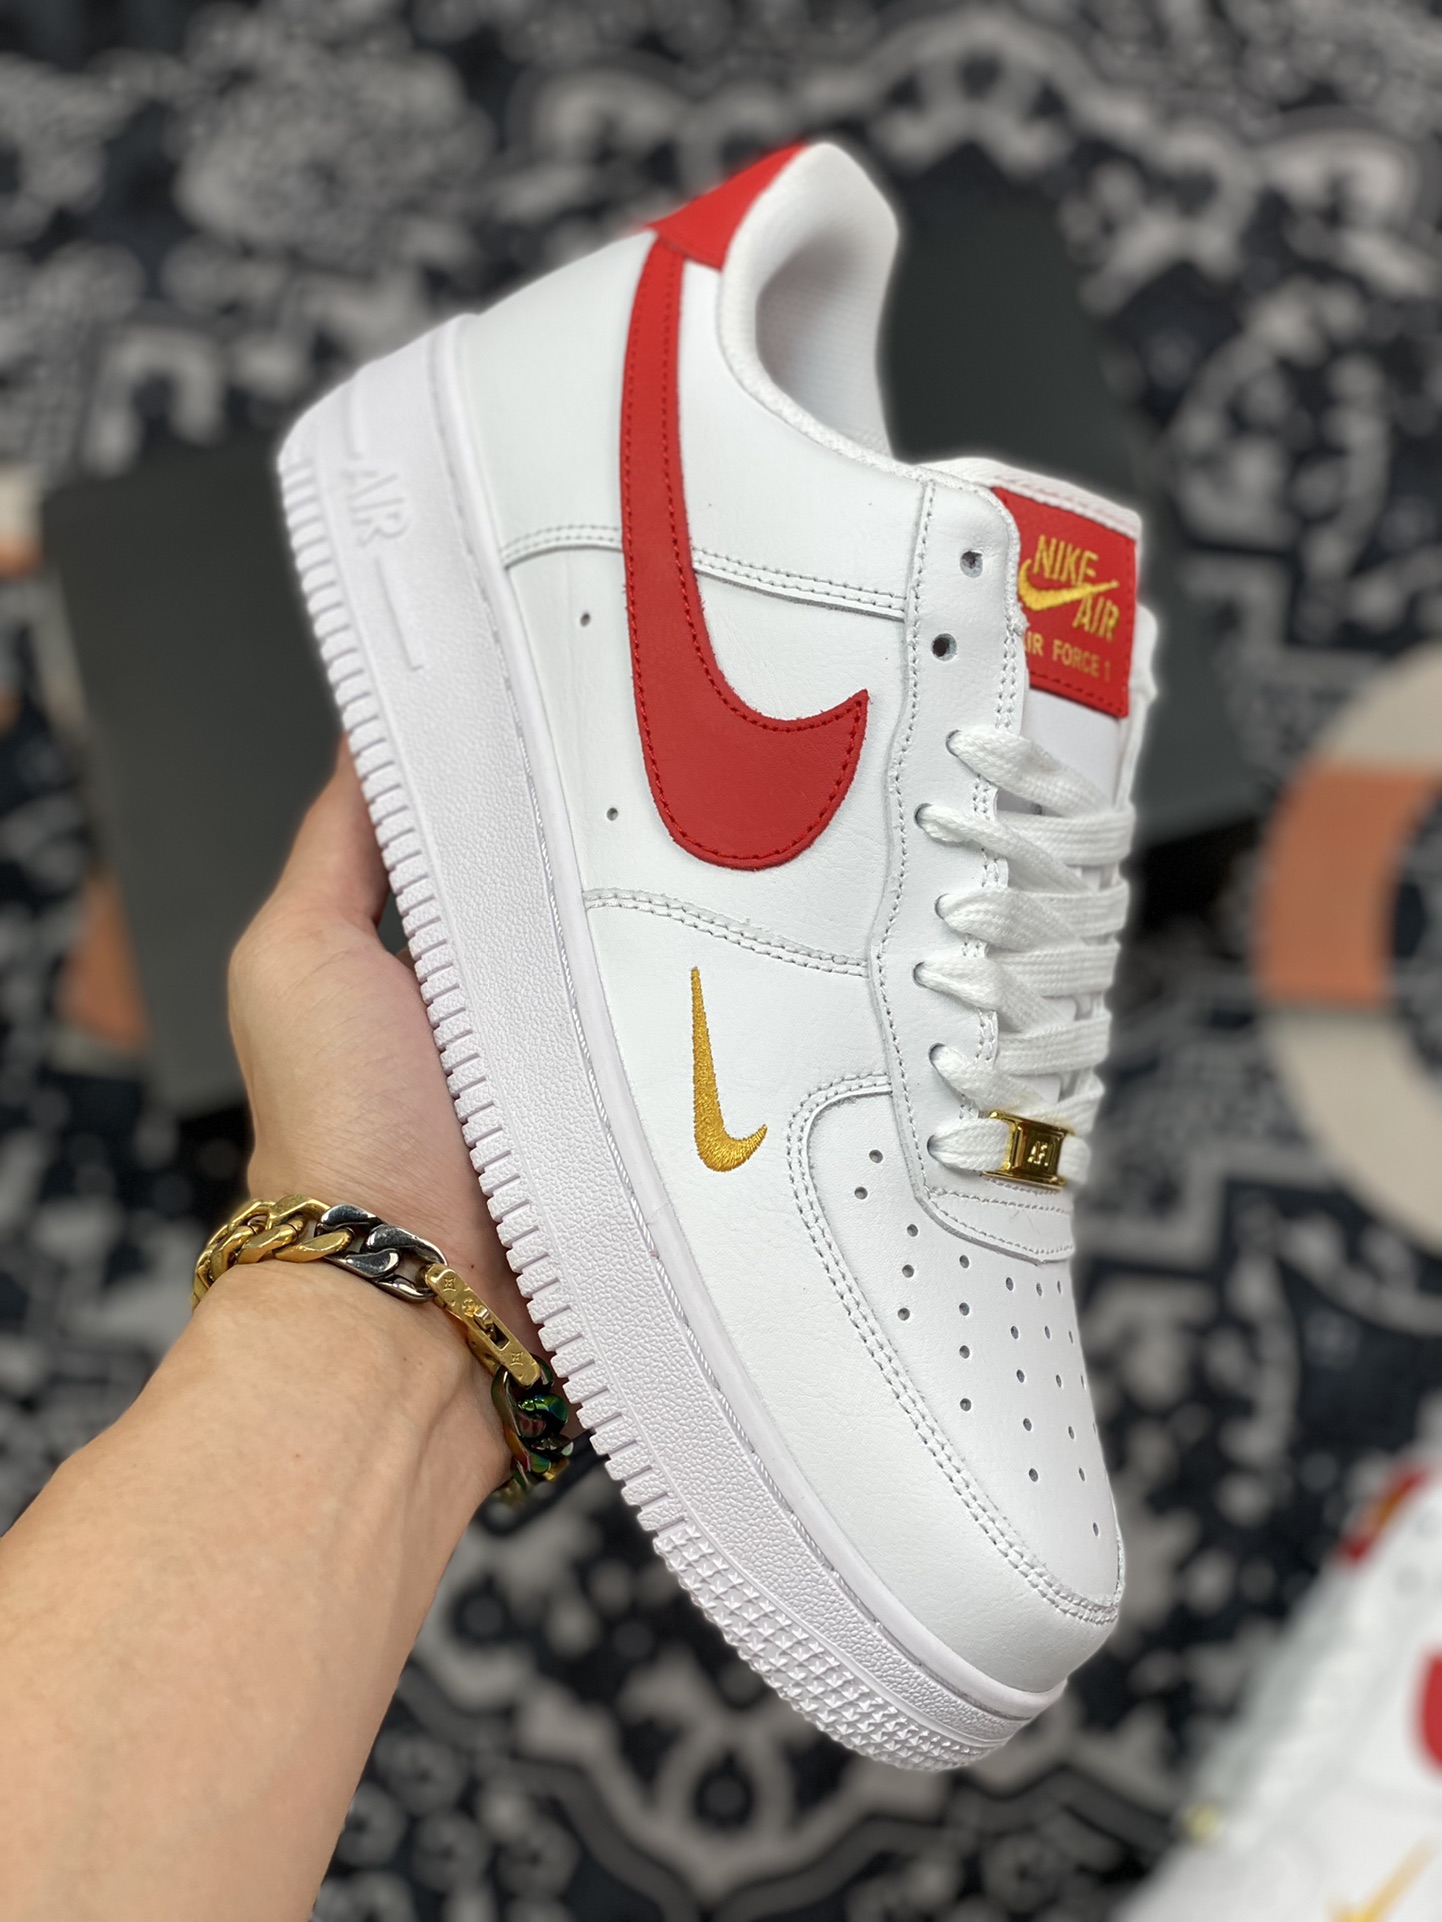 Nike Air AF Force 1 '07 Essential White/Gym Red Shoes